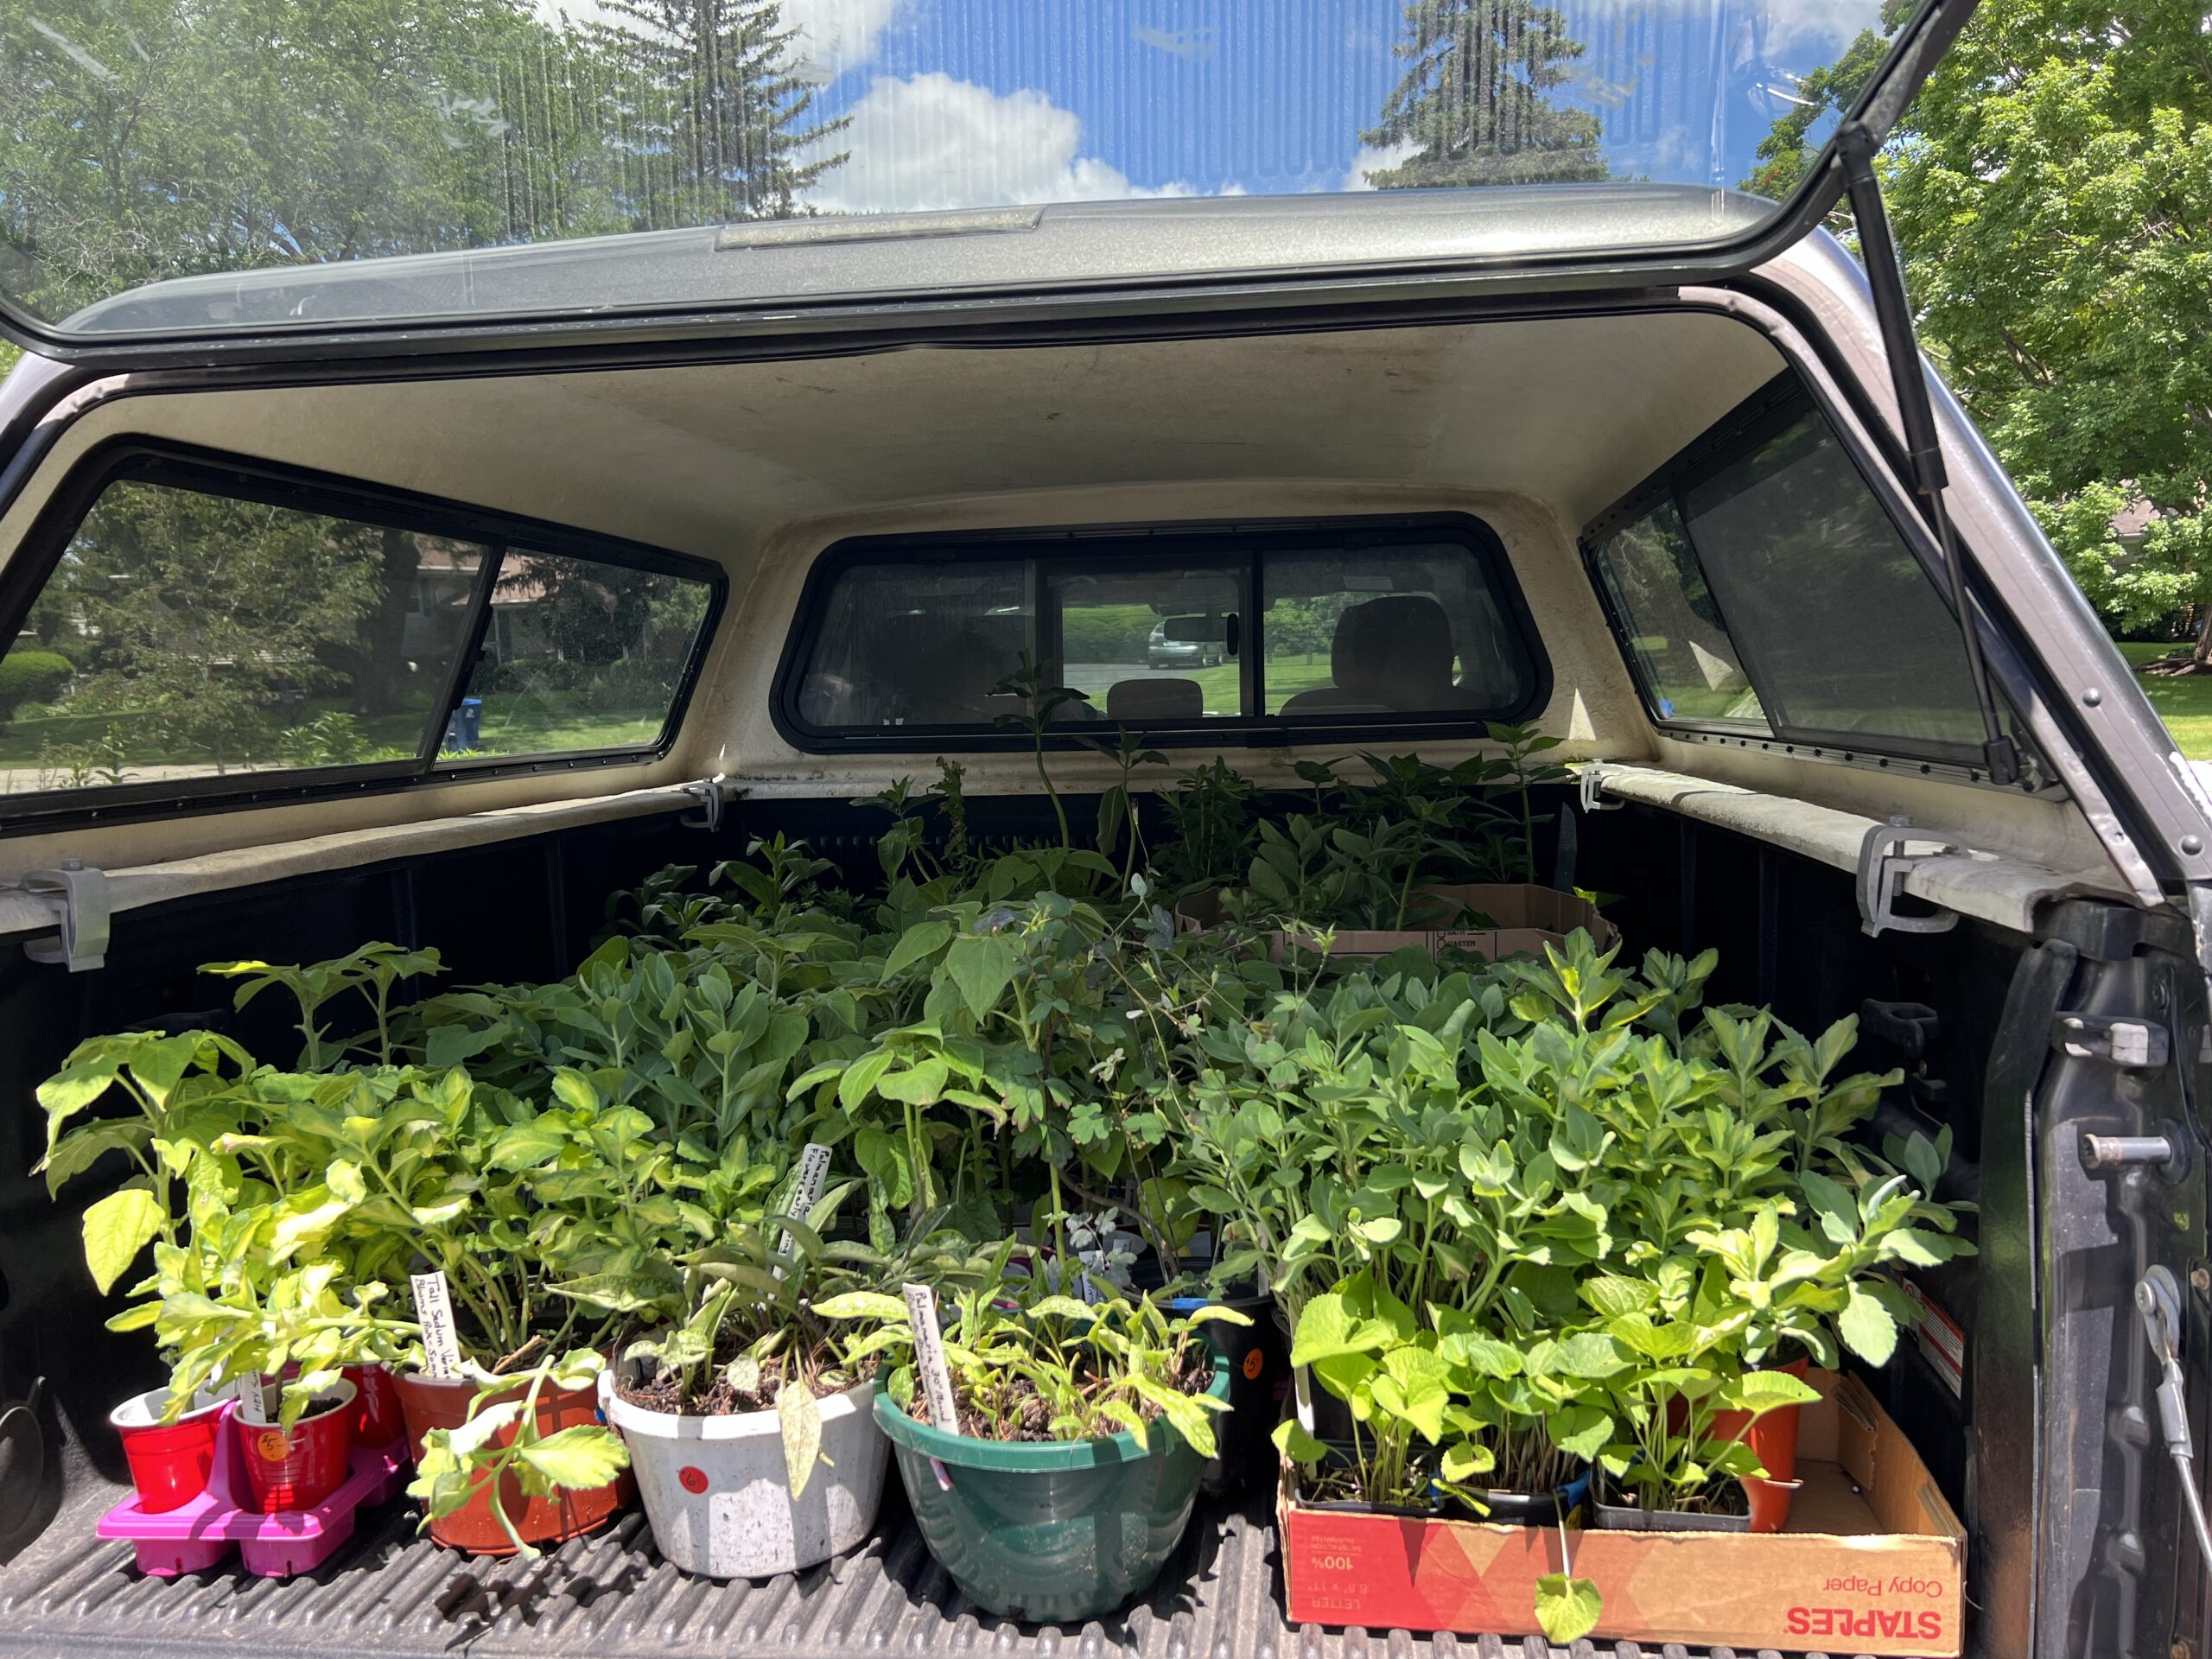 Loading up all of the plants!